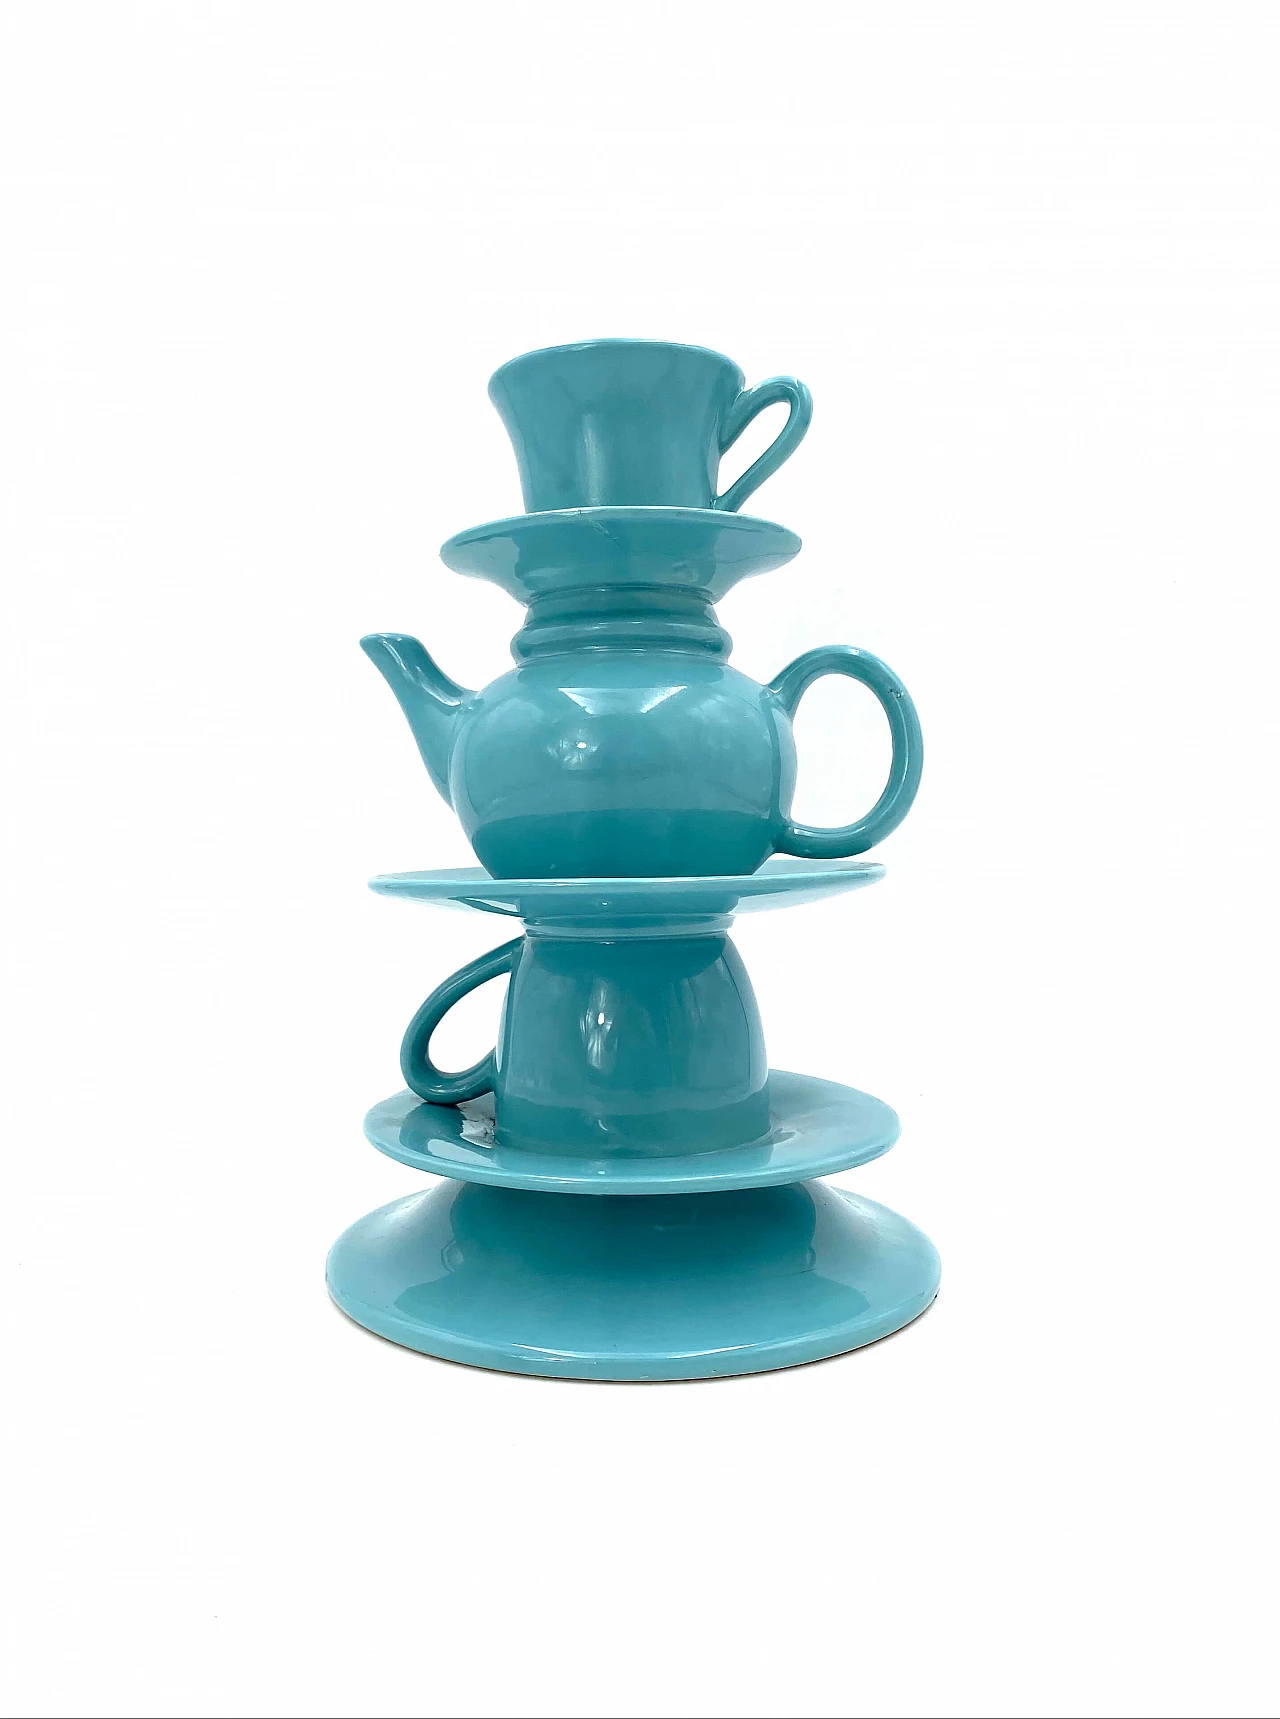 Vase in the shape of stacked blue teacups, 80s 1251802